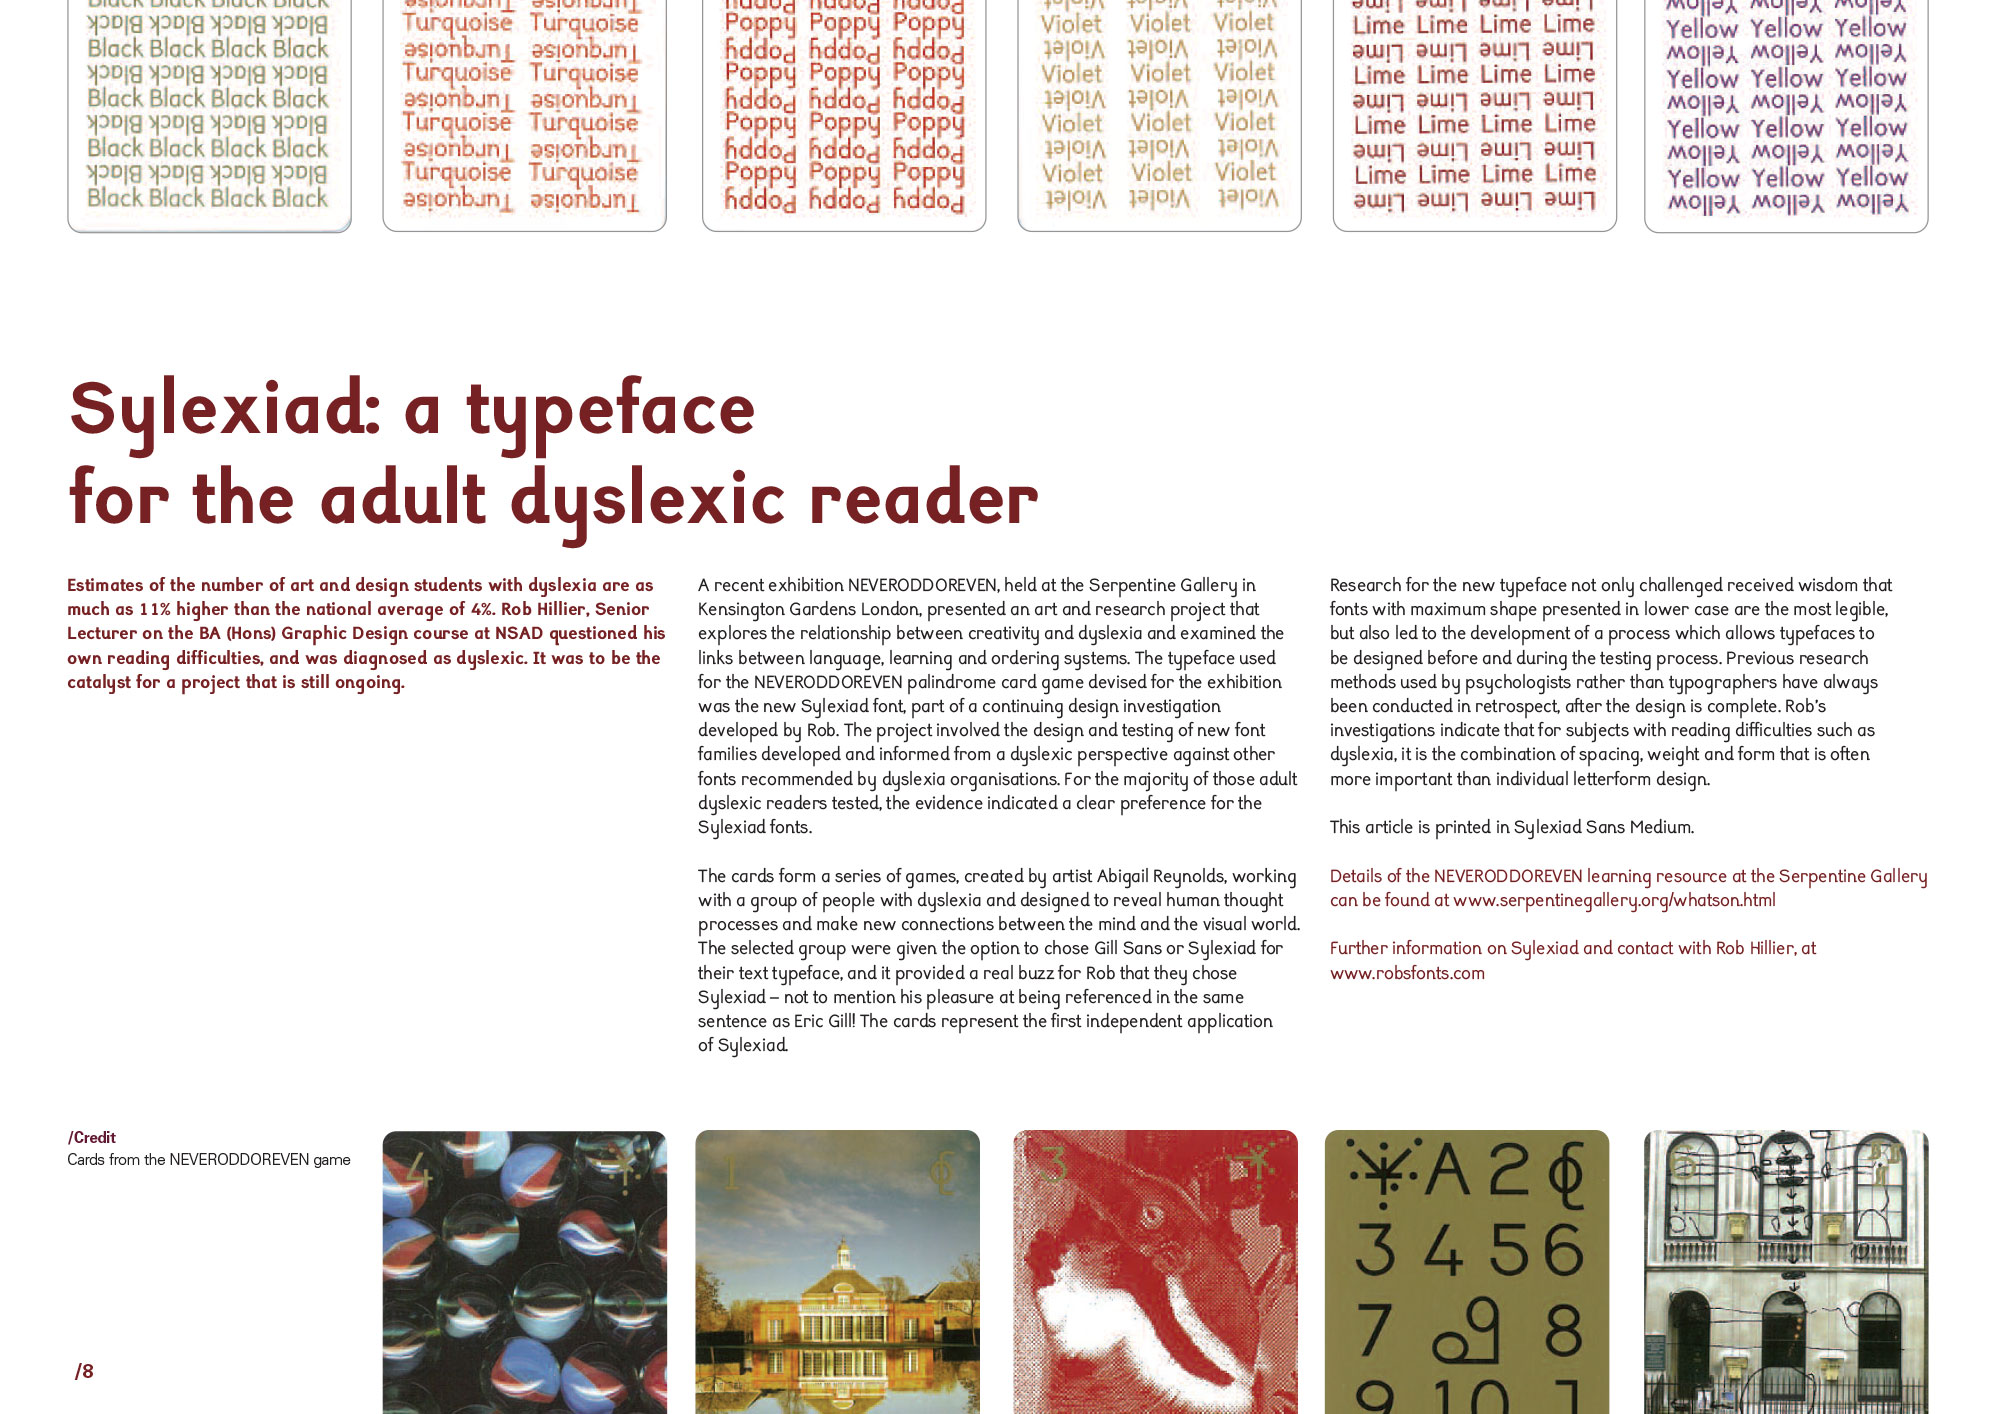 Image of a page from the magazine, shows various typographic experiments with letters, then the title ‘Sylexiad: a typeface for the adult dyslexic reader’ in dark red in the middle